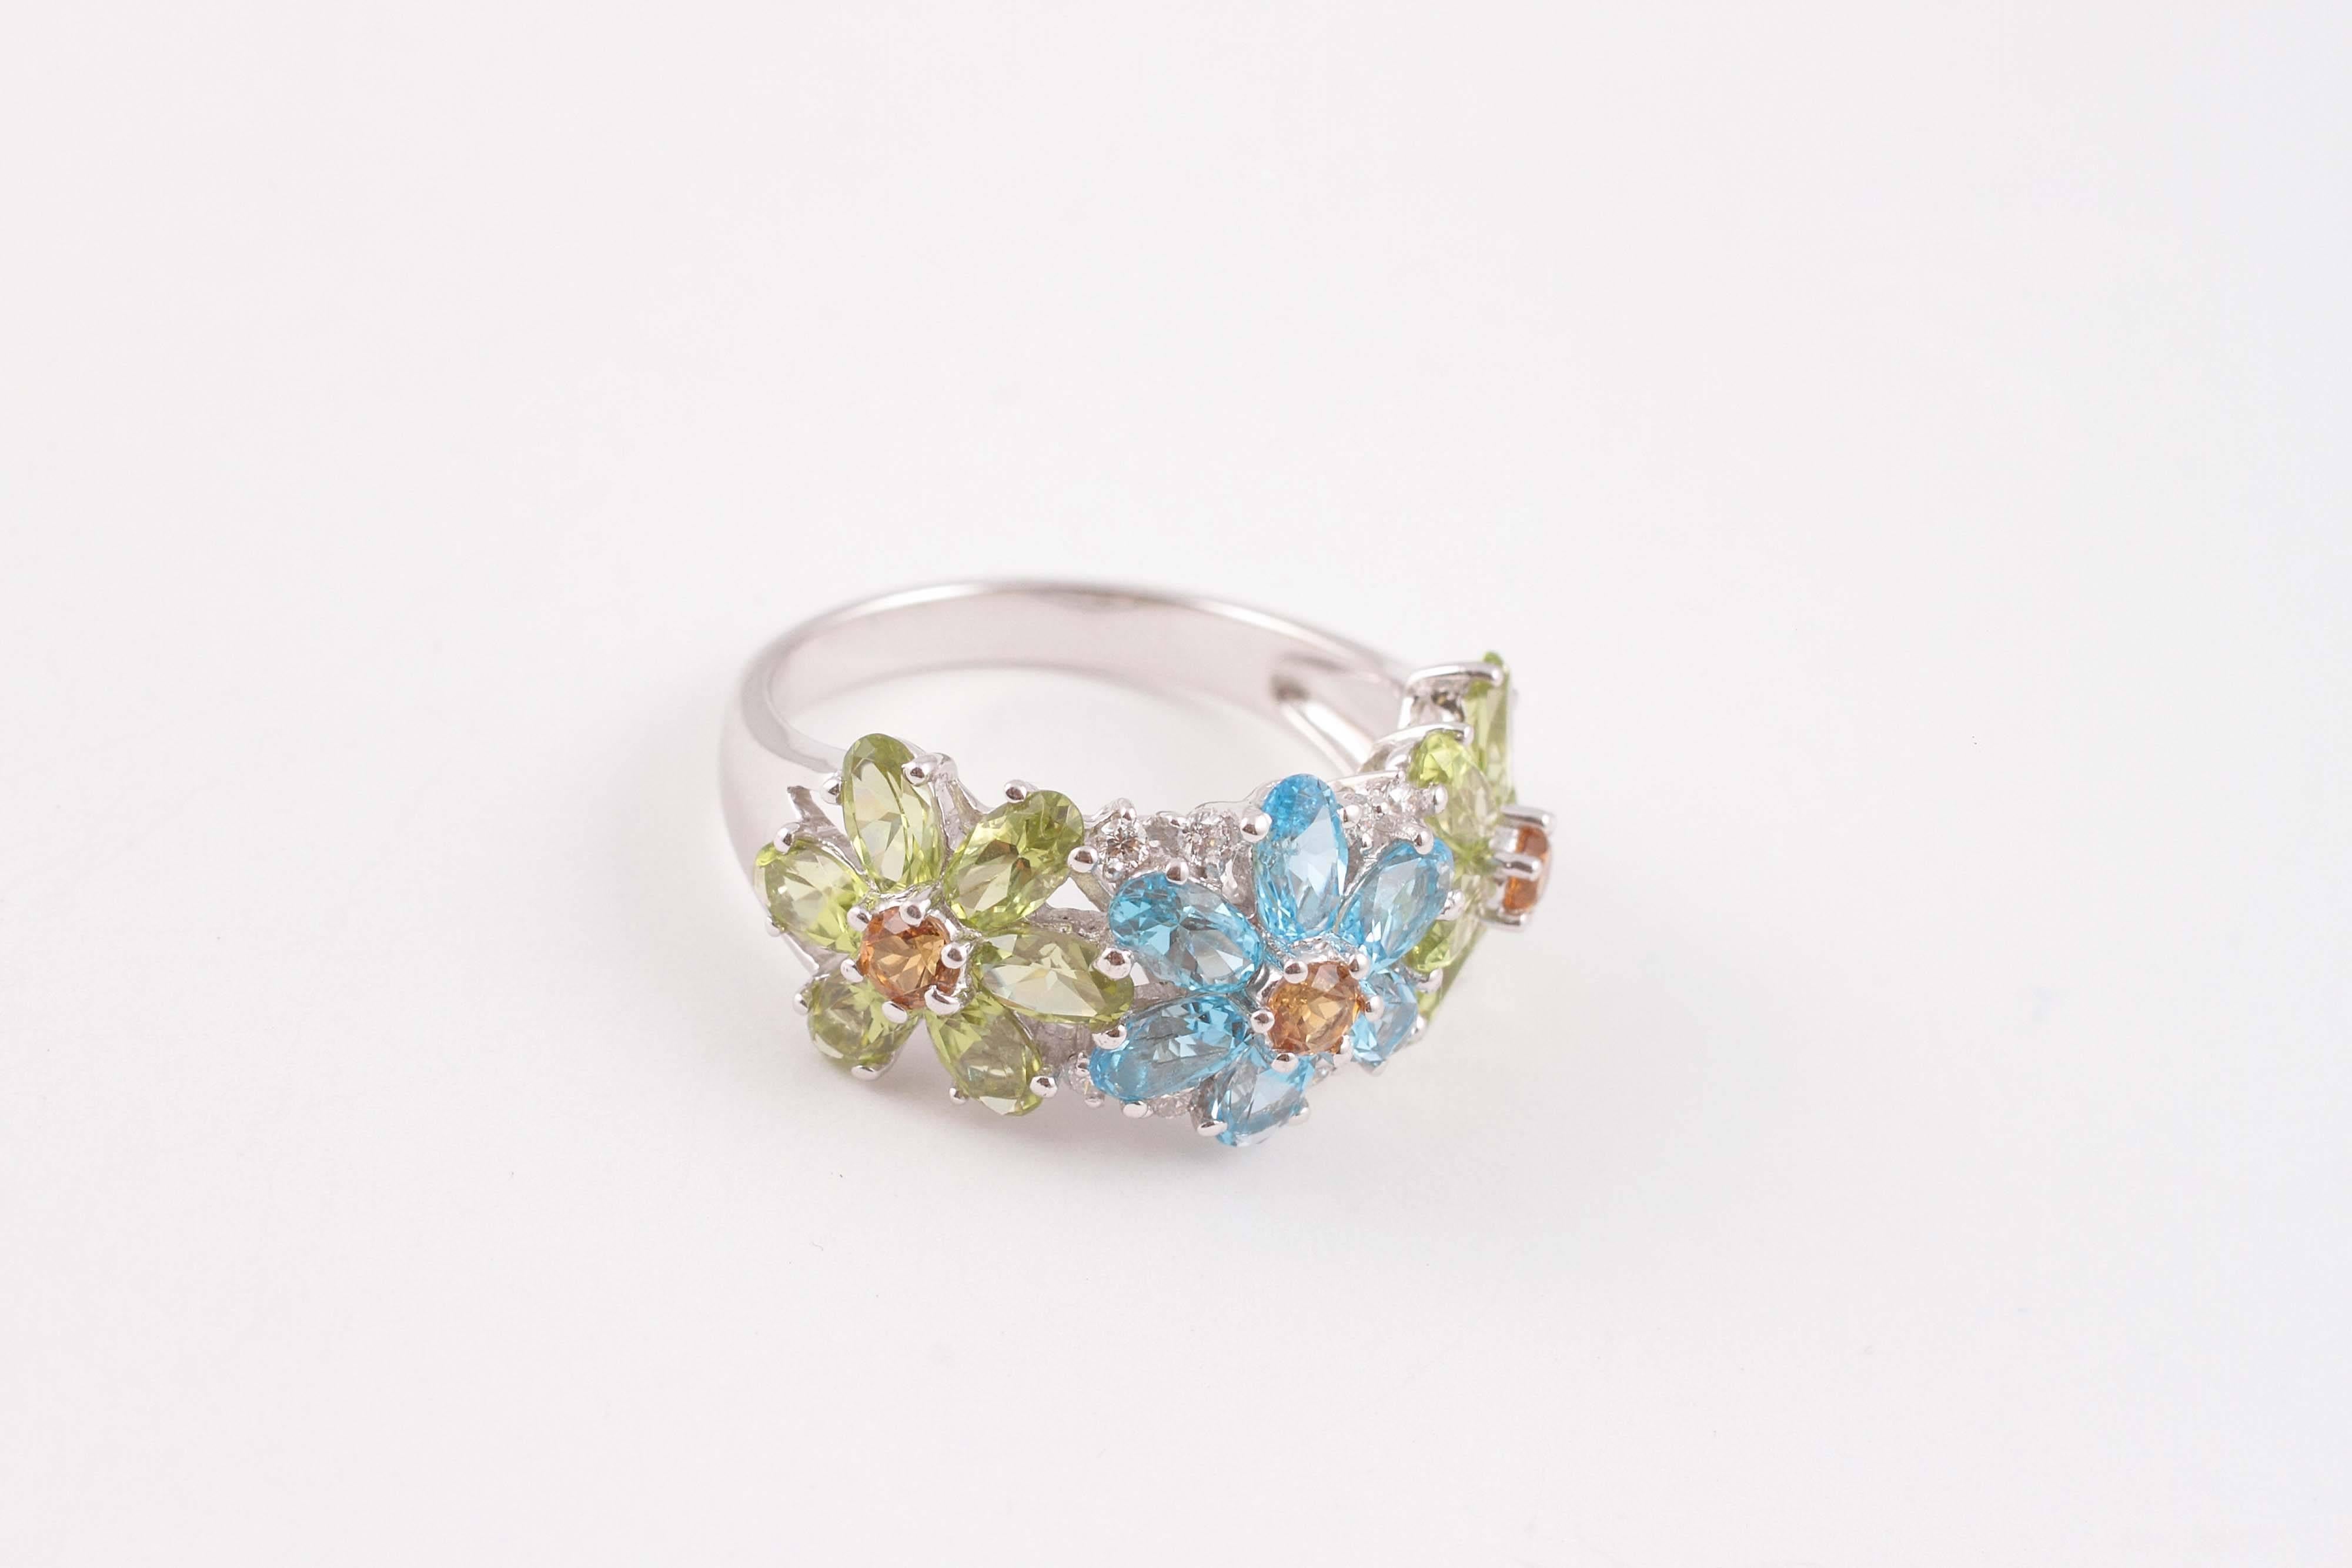 What a fun Flower ring!  With bright and shining topaz, peridot and citrine stones, in 14 karat white gold, Size 9.